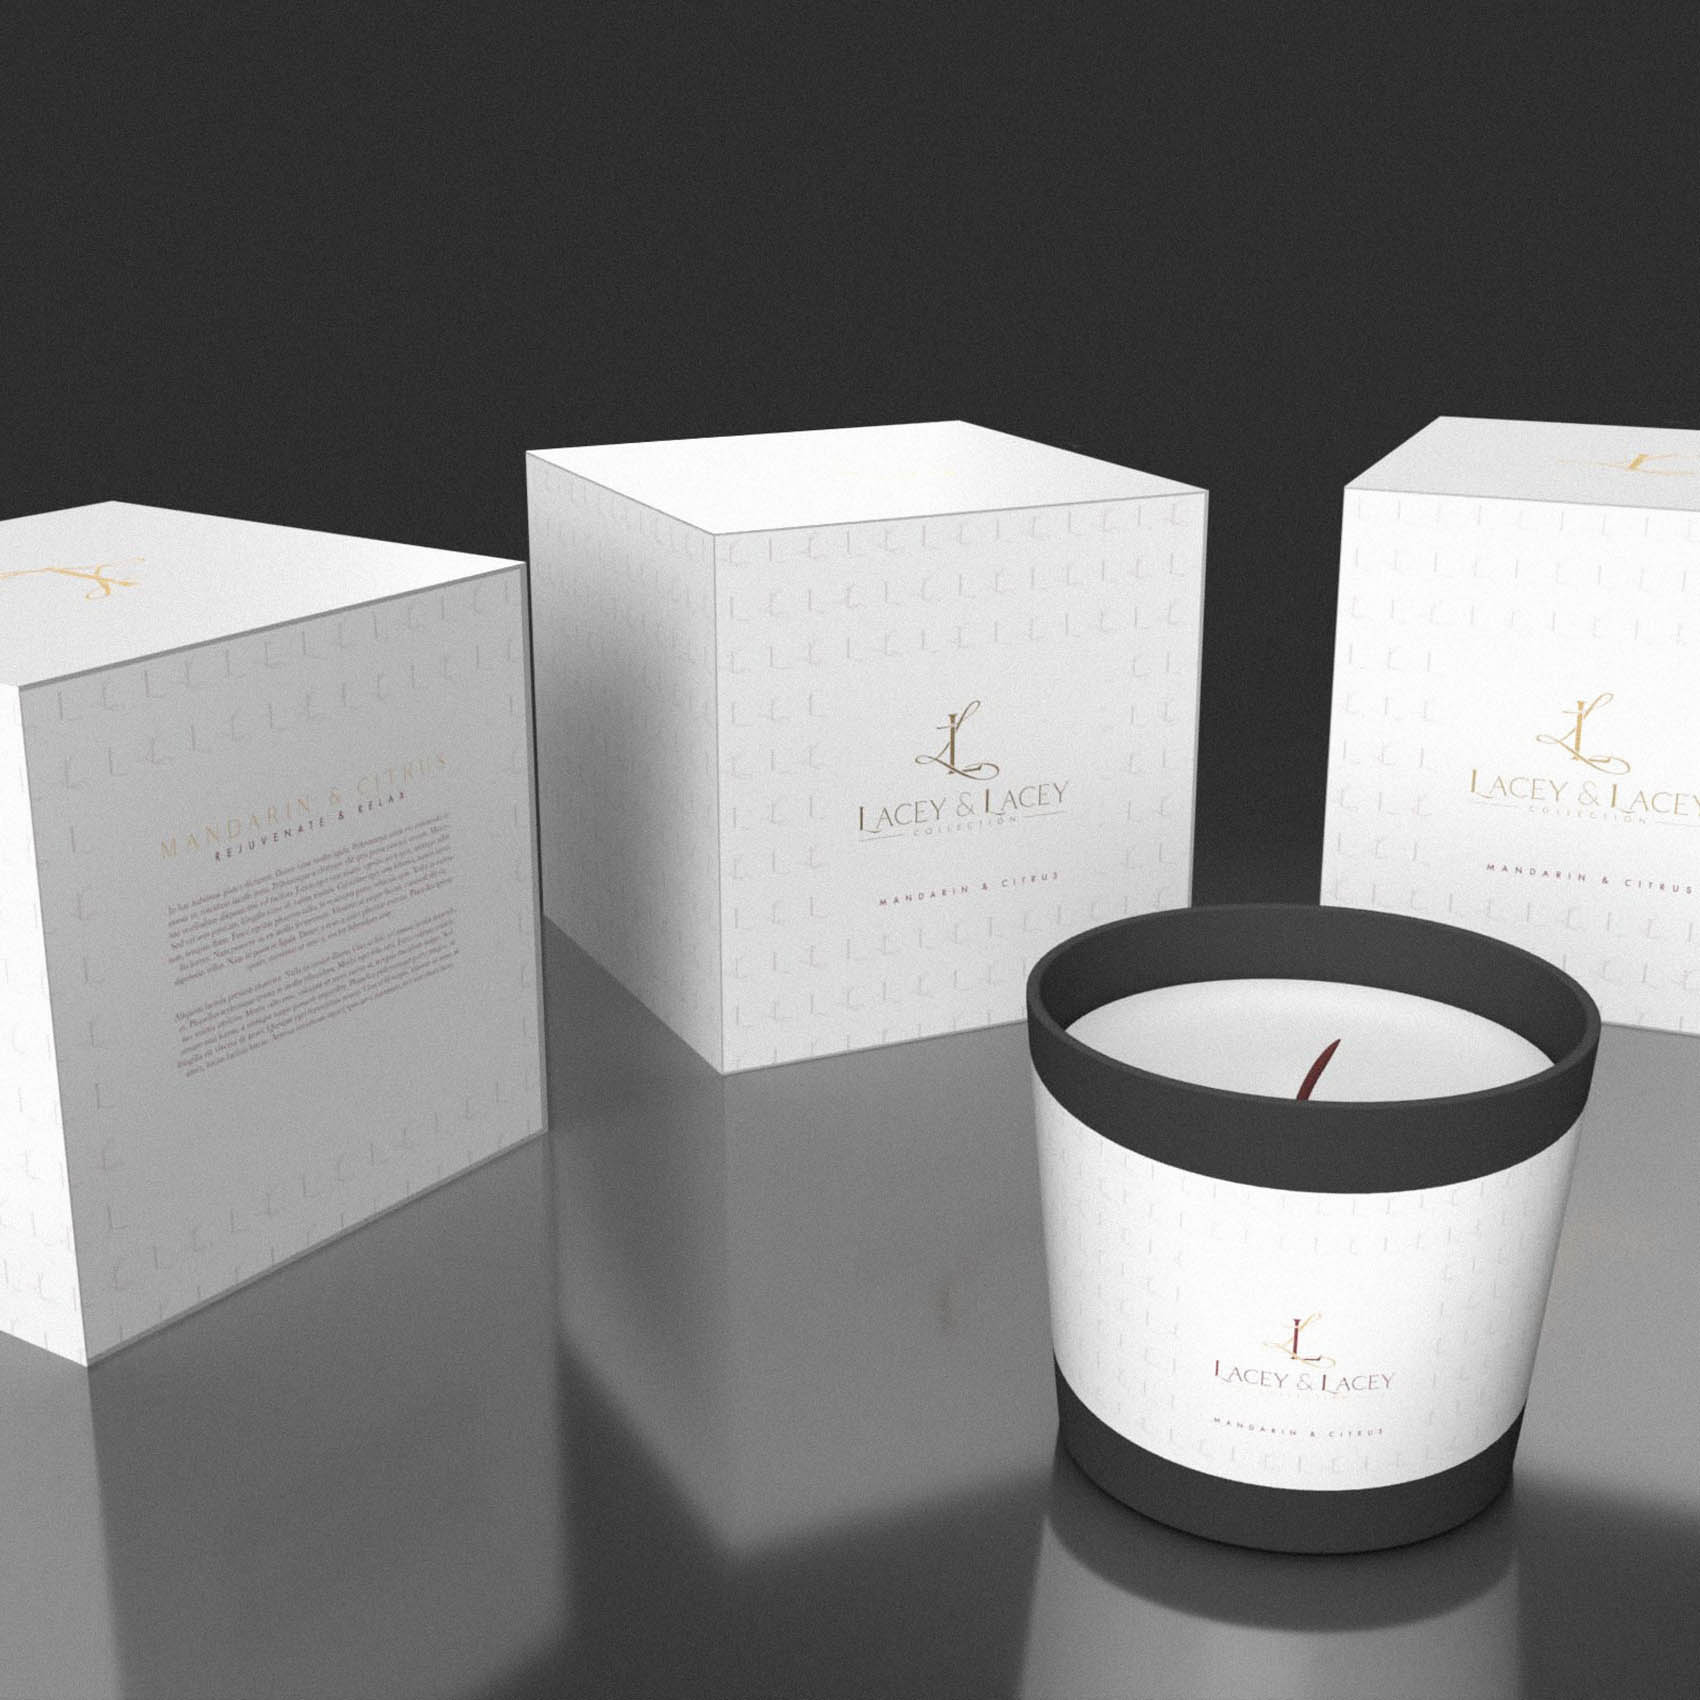 Lacey & Lacey - Luxury Candle Packaging Logo & Brand Identity14